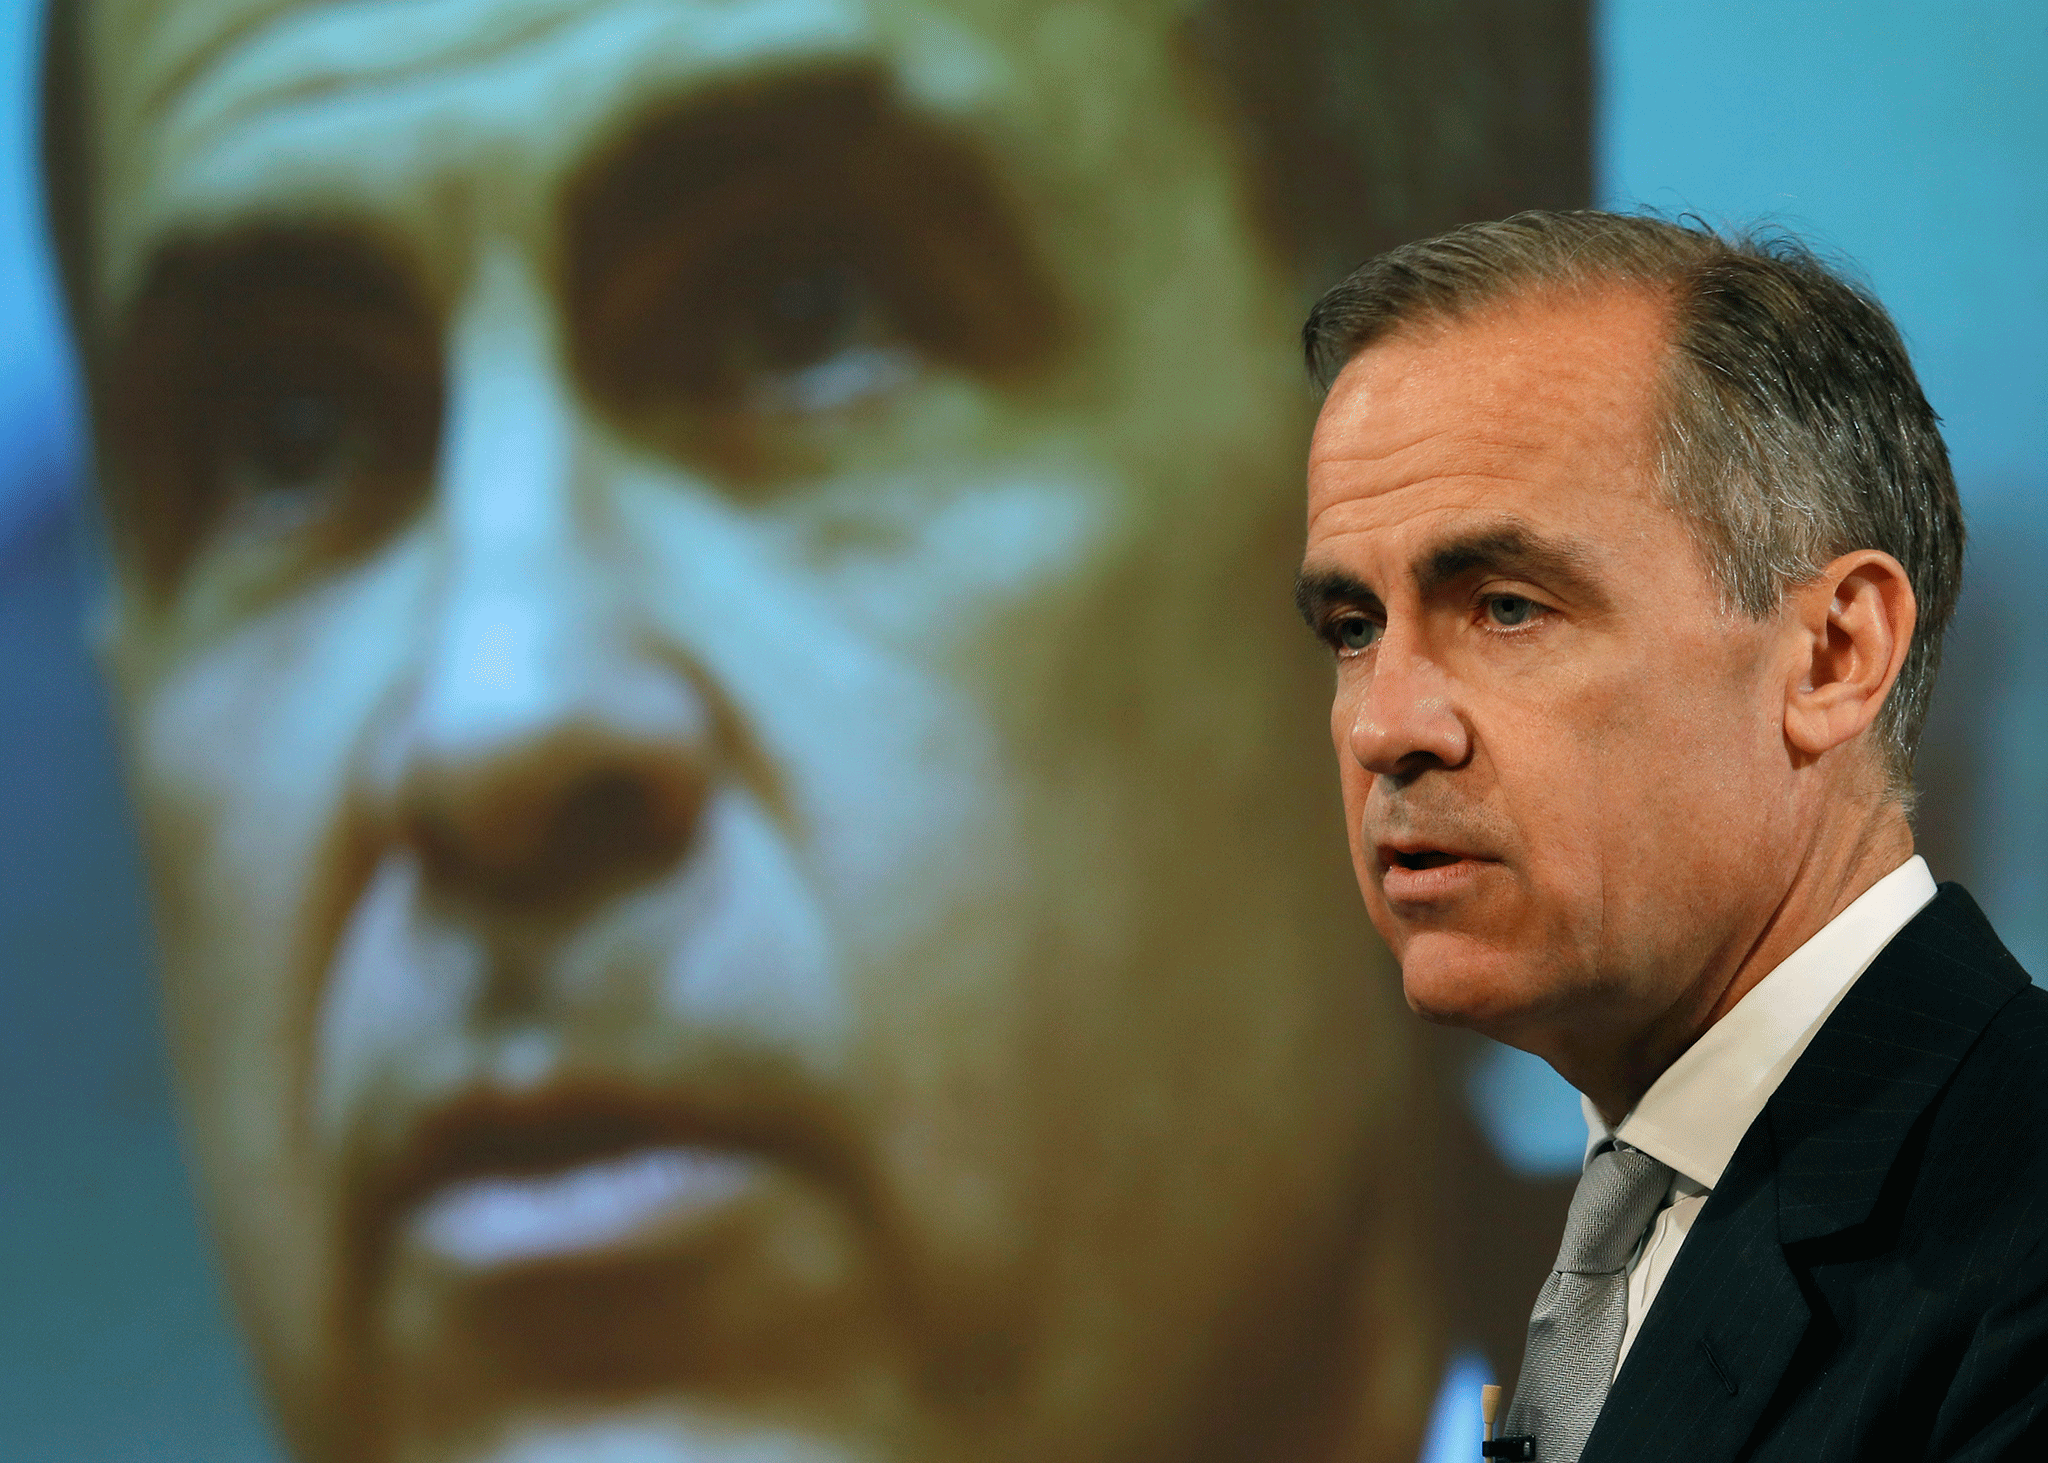 Mark Carney urges banks to prepare for all potential Brexit outcomes